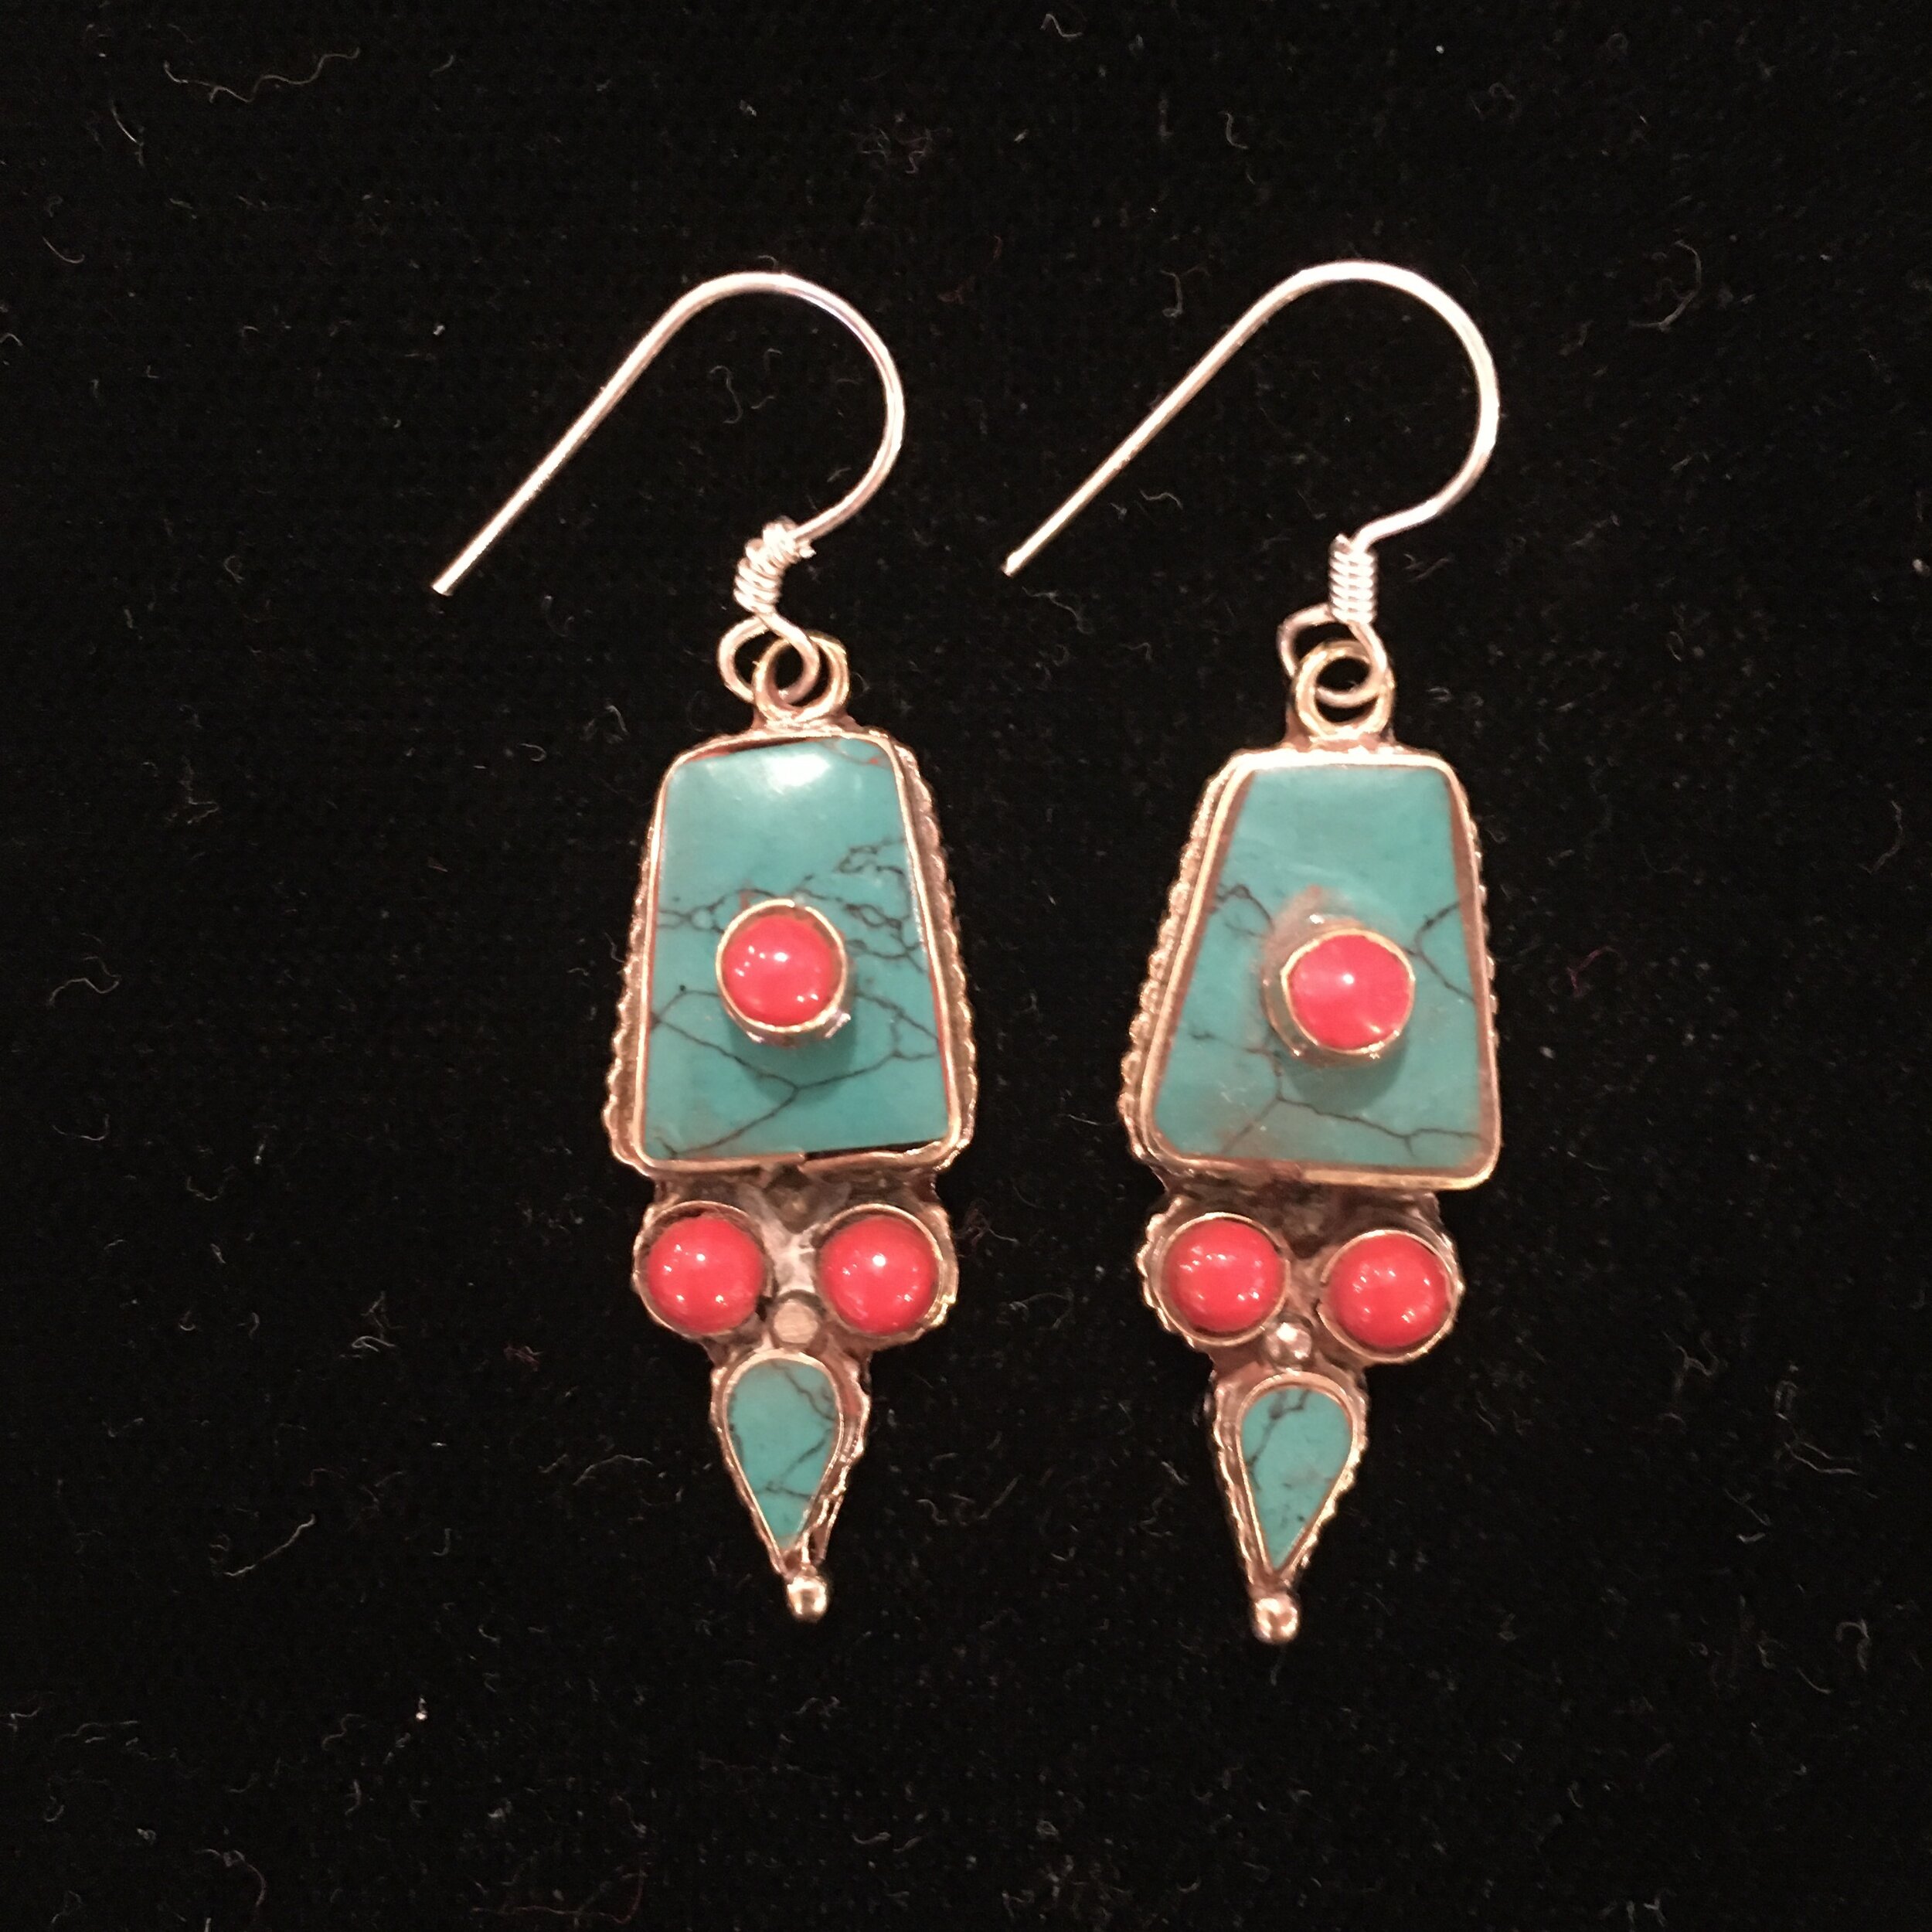 Details about   Turquoise Earring Coral earring Tribal Earring Lapis Earring Tibetan Earring 